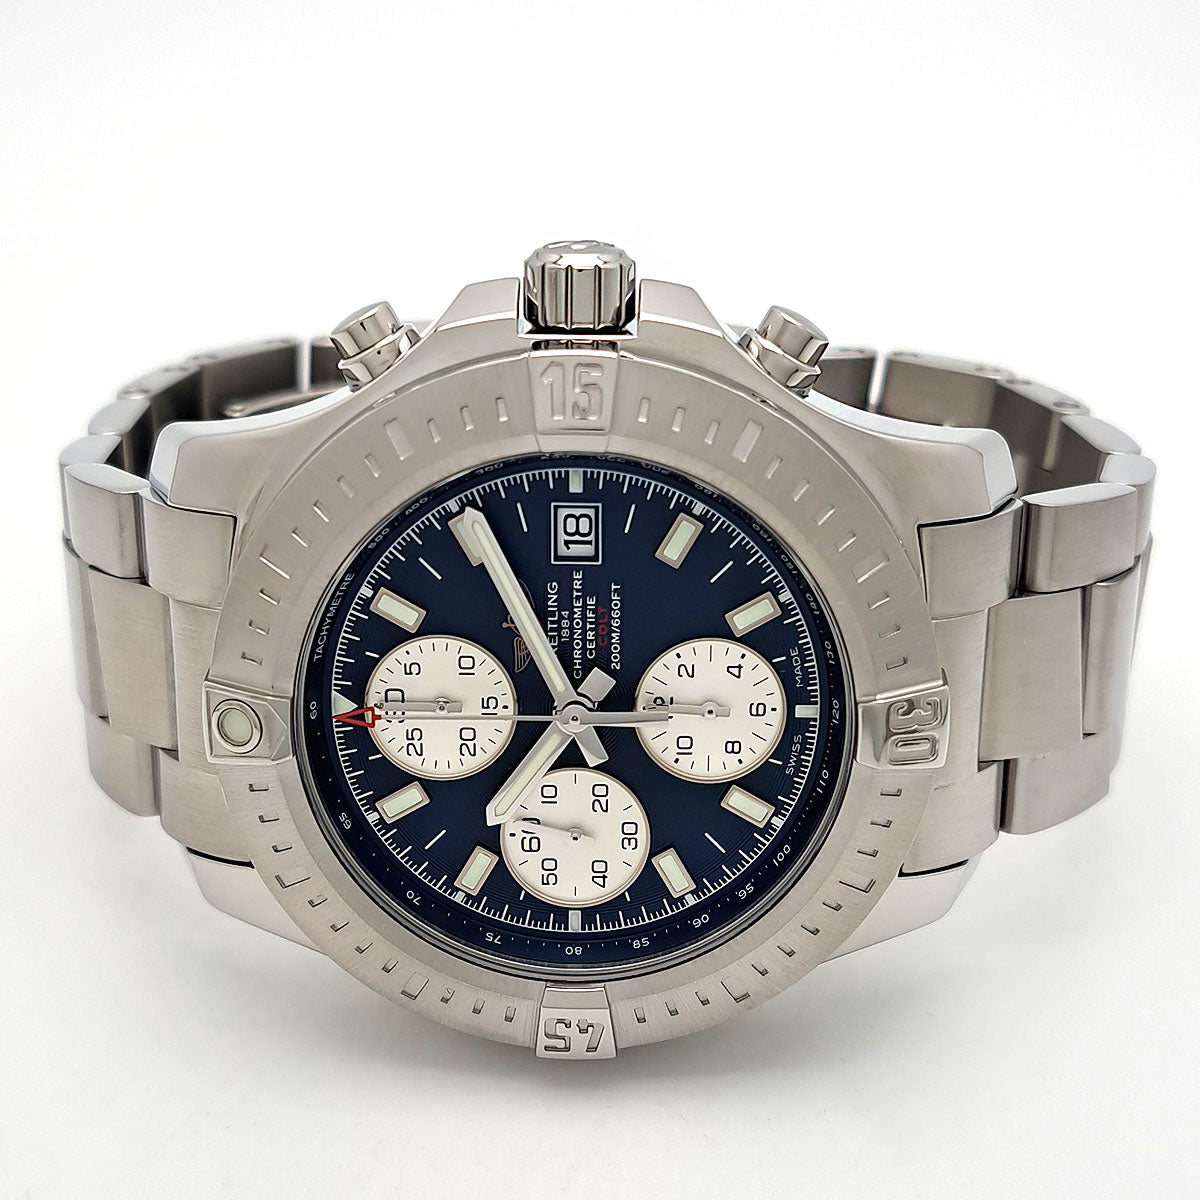 BREITLING Colt Chronograph Automatic A13388 Stainless Steel Men's Watch [Used] A13388